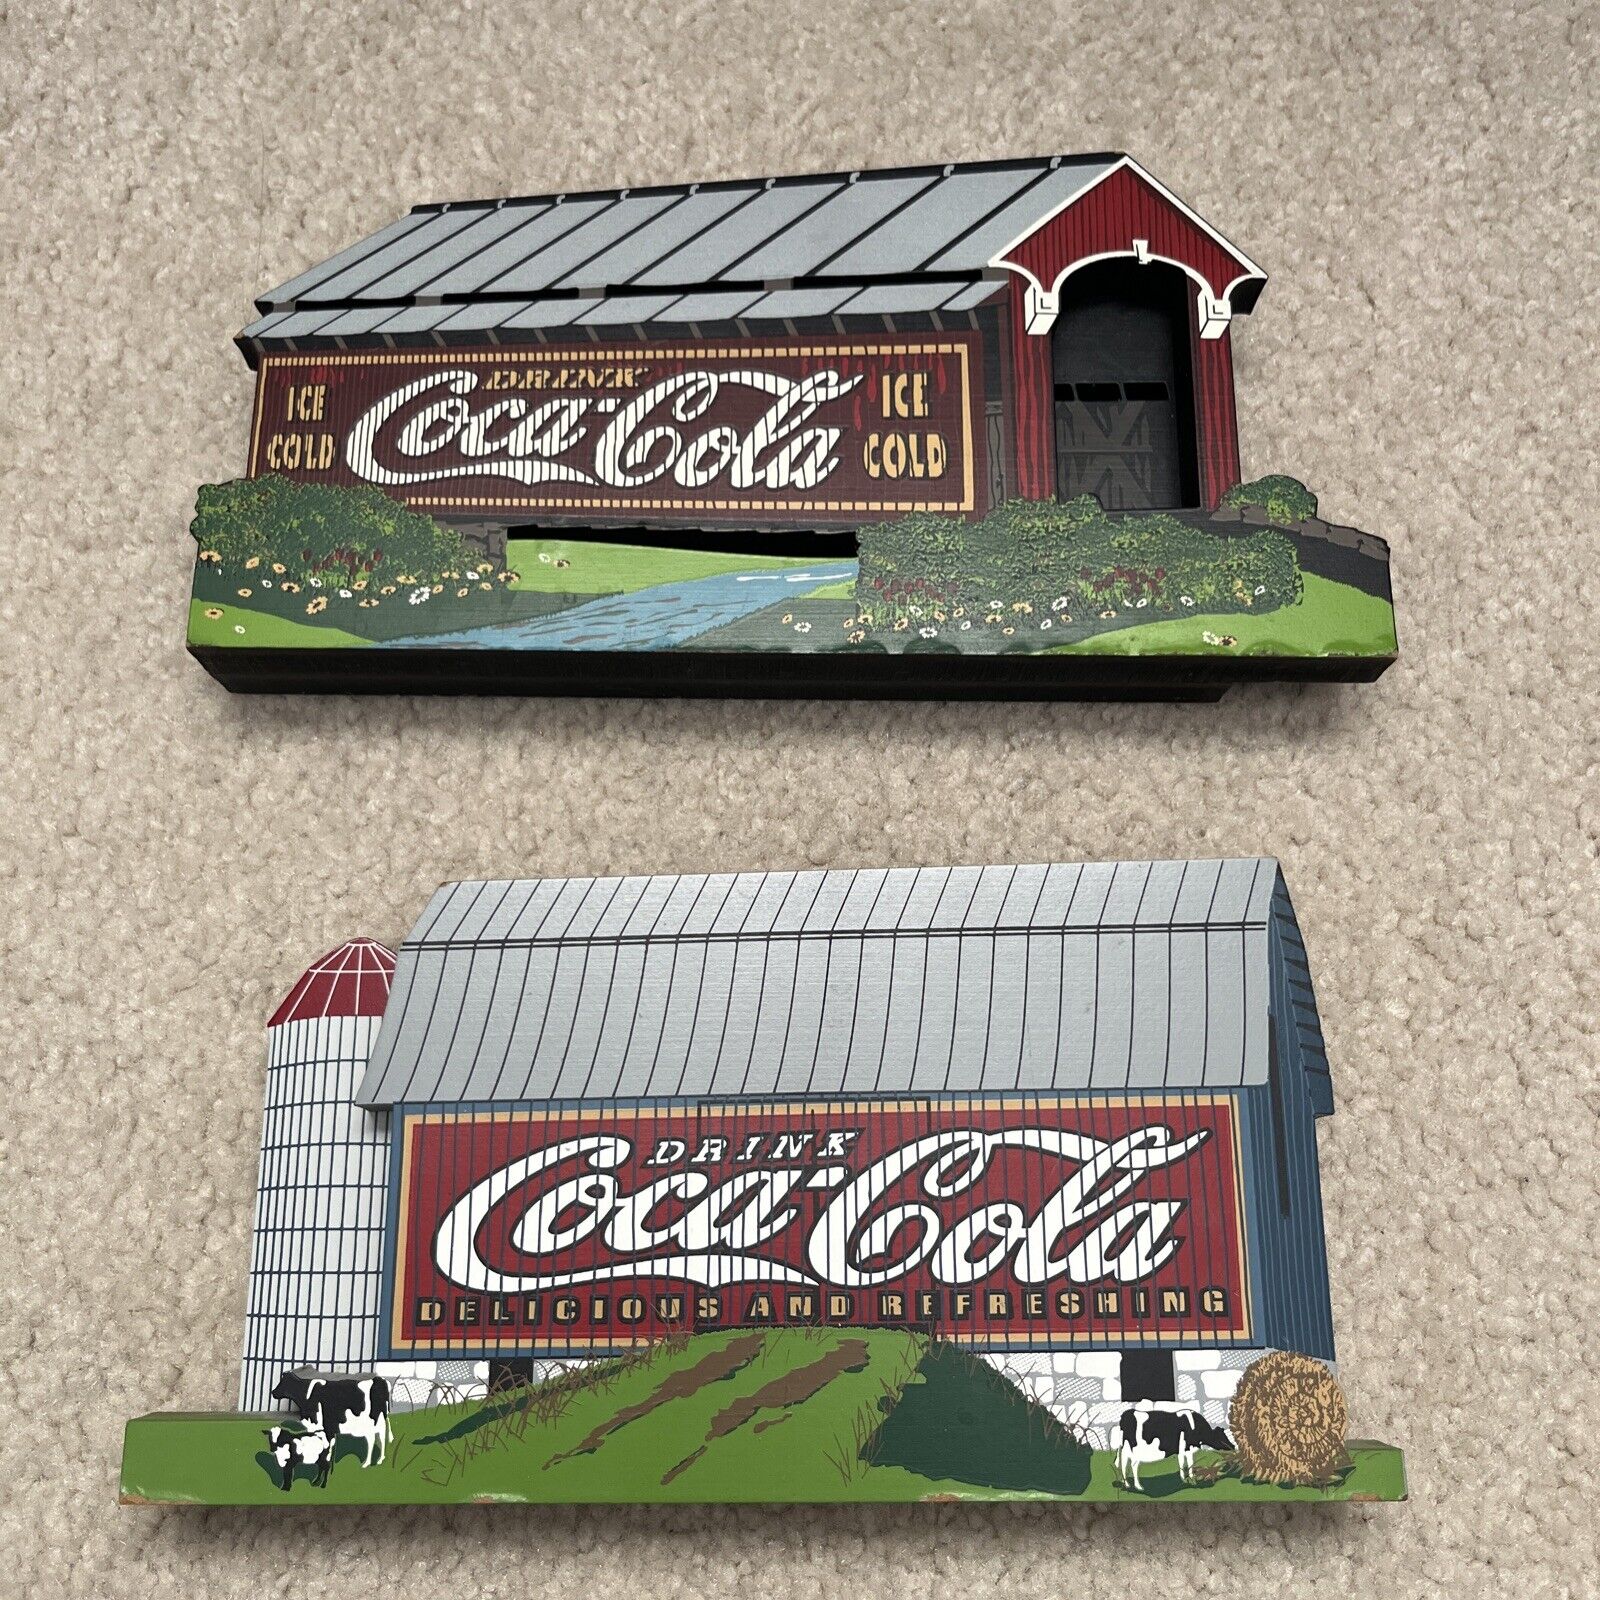 1998 SHELIA'S HOUSES  COVER YOUR THIRST COCA-COLA  Covered Bridge And Barn